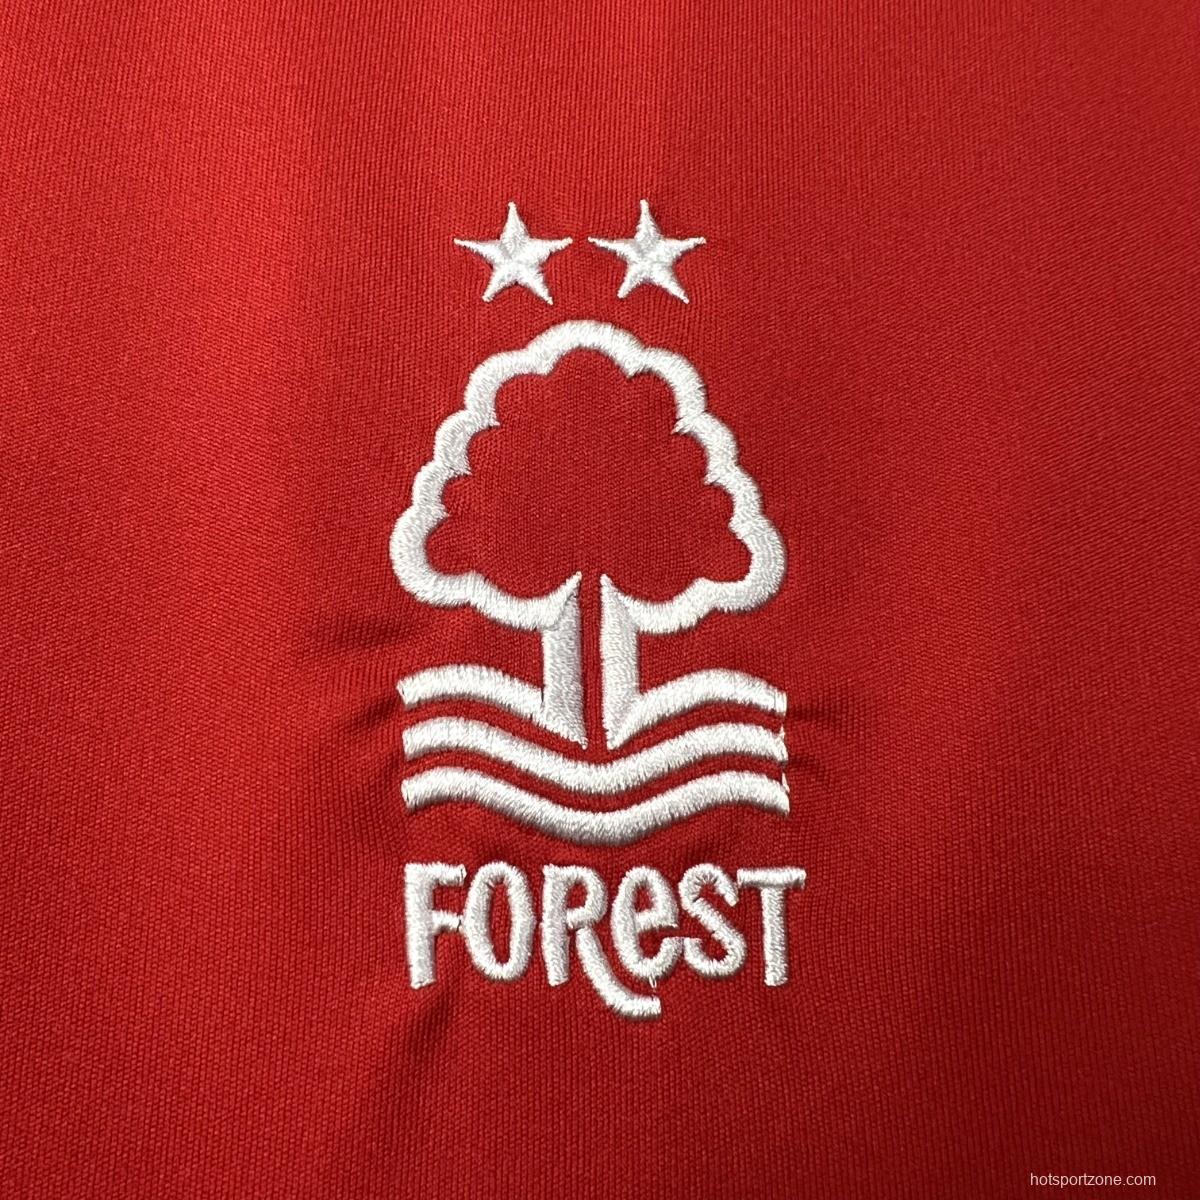 23/24 Nottingham Forest Home Jersey With Sponsor